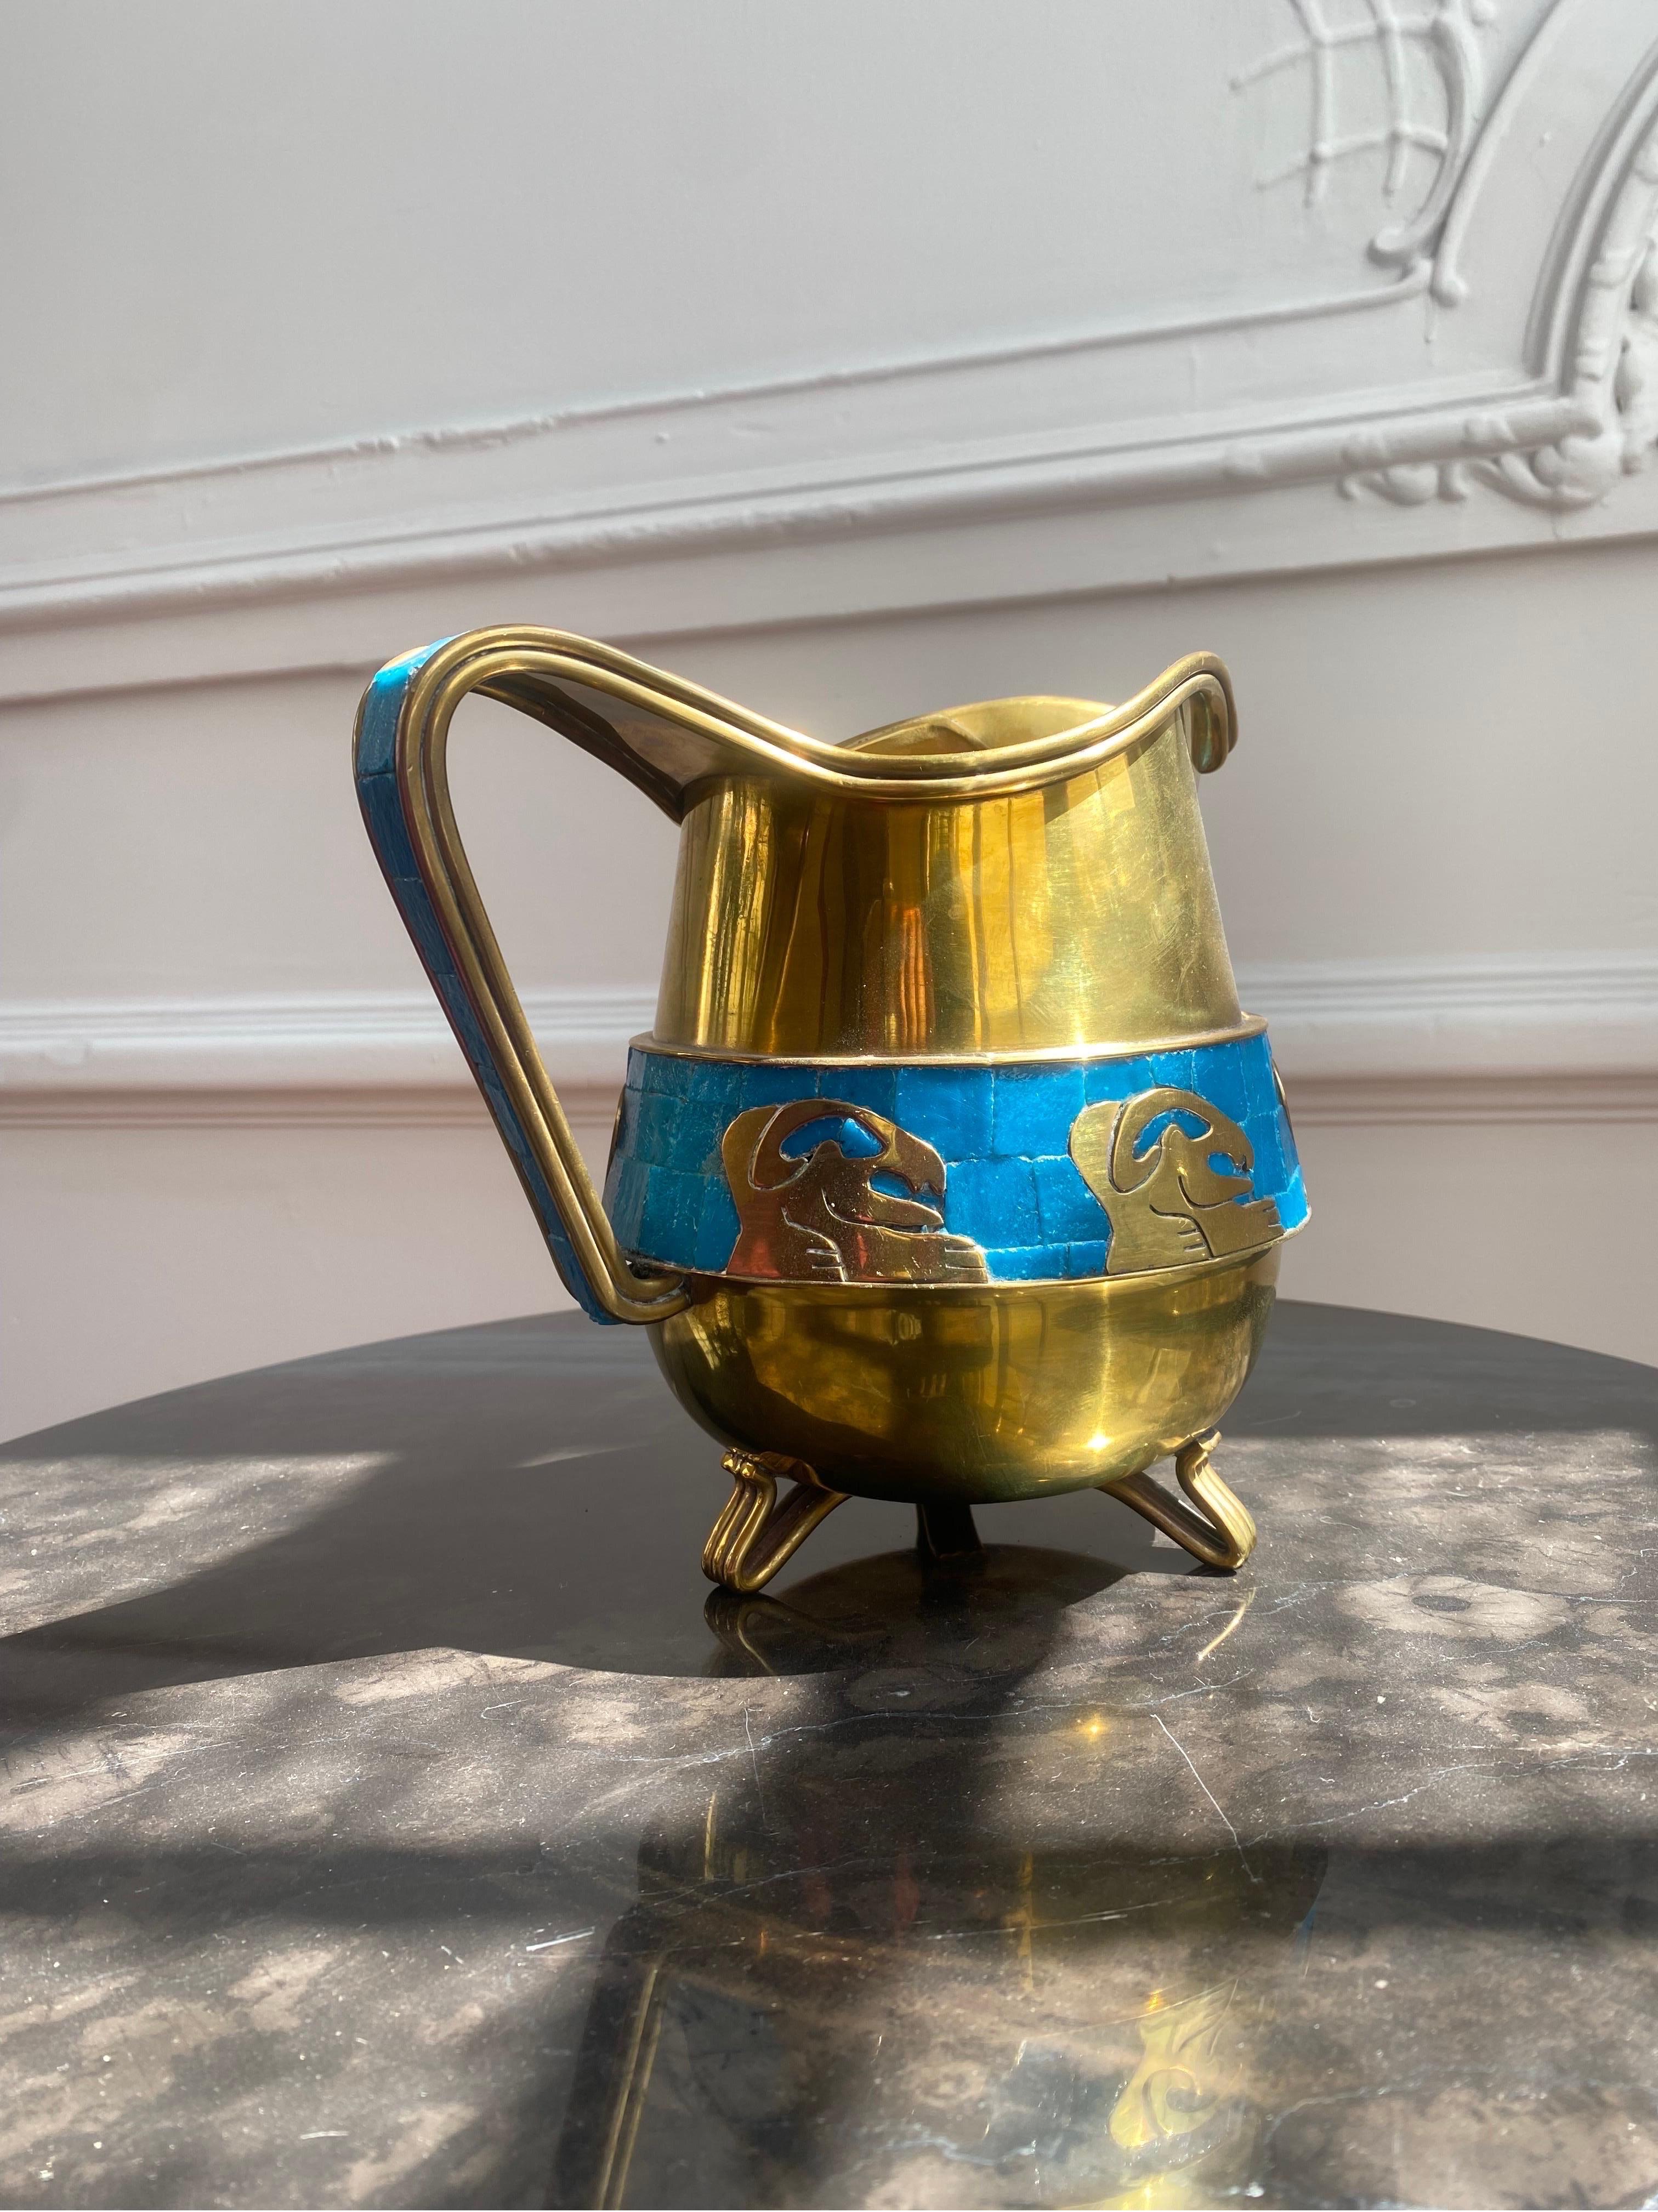 Beautiful and in very good condition pitcher designed by Salvador Terán. Made in Taxco, Mexico year 1960 in brass and glass mosiac. Designed with interesting figures and remarkable craftsmanship this pitcher is an eye catcher that represents part of